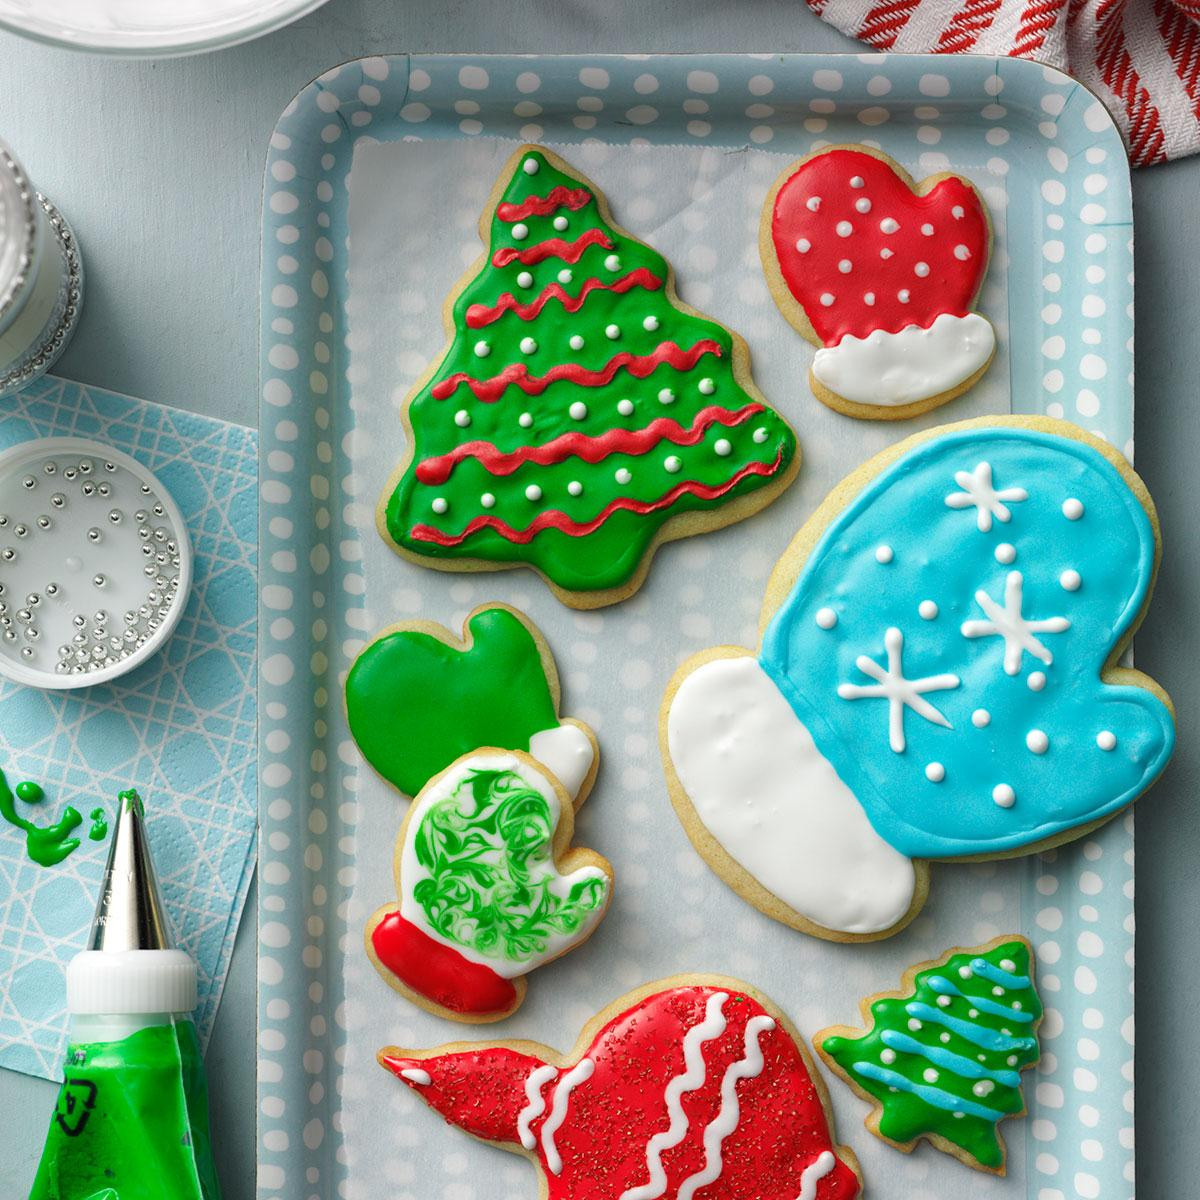 Pics Of Christmas Cookies
 Holiday Cutout Cookies Recipe